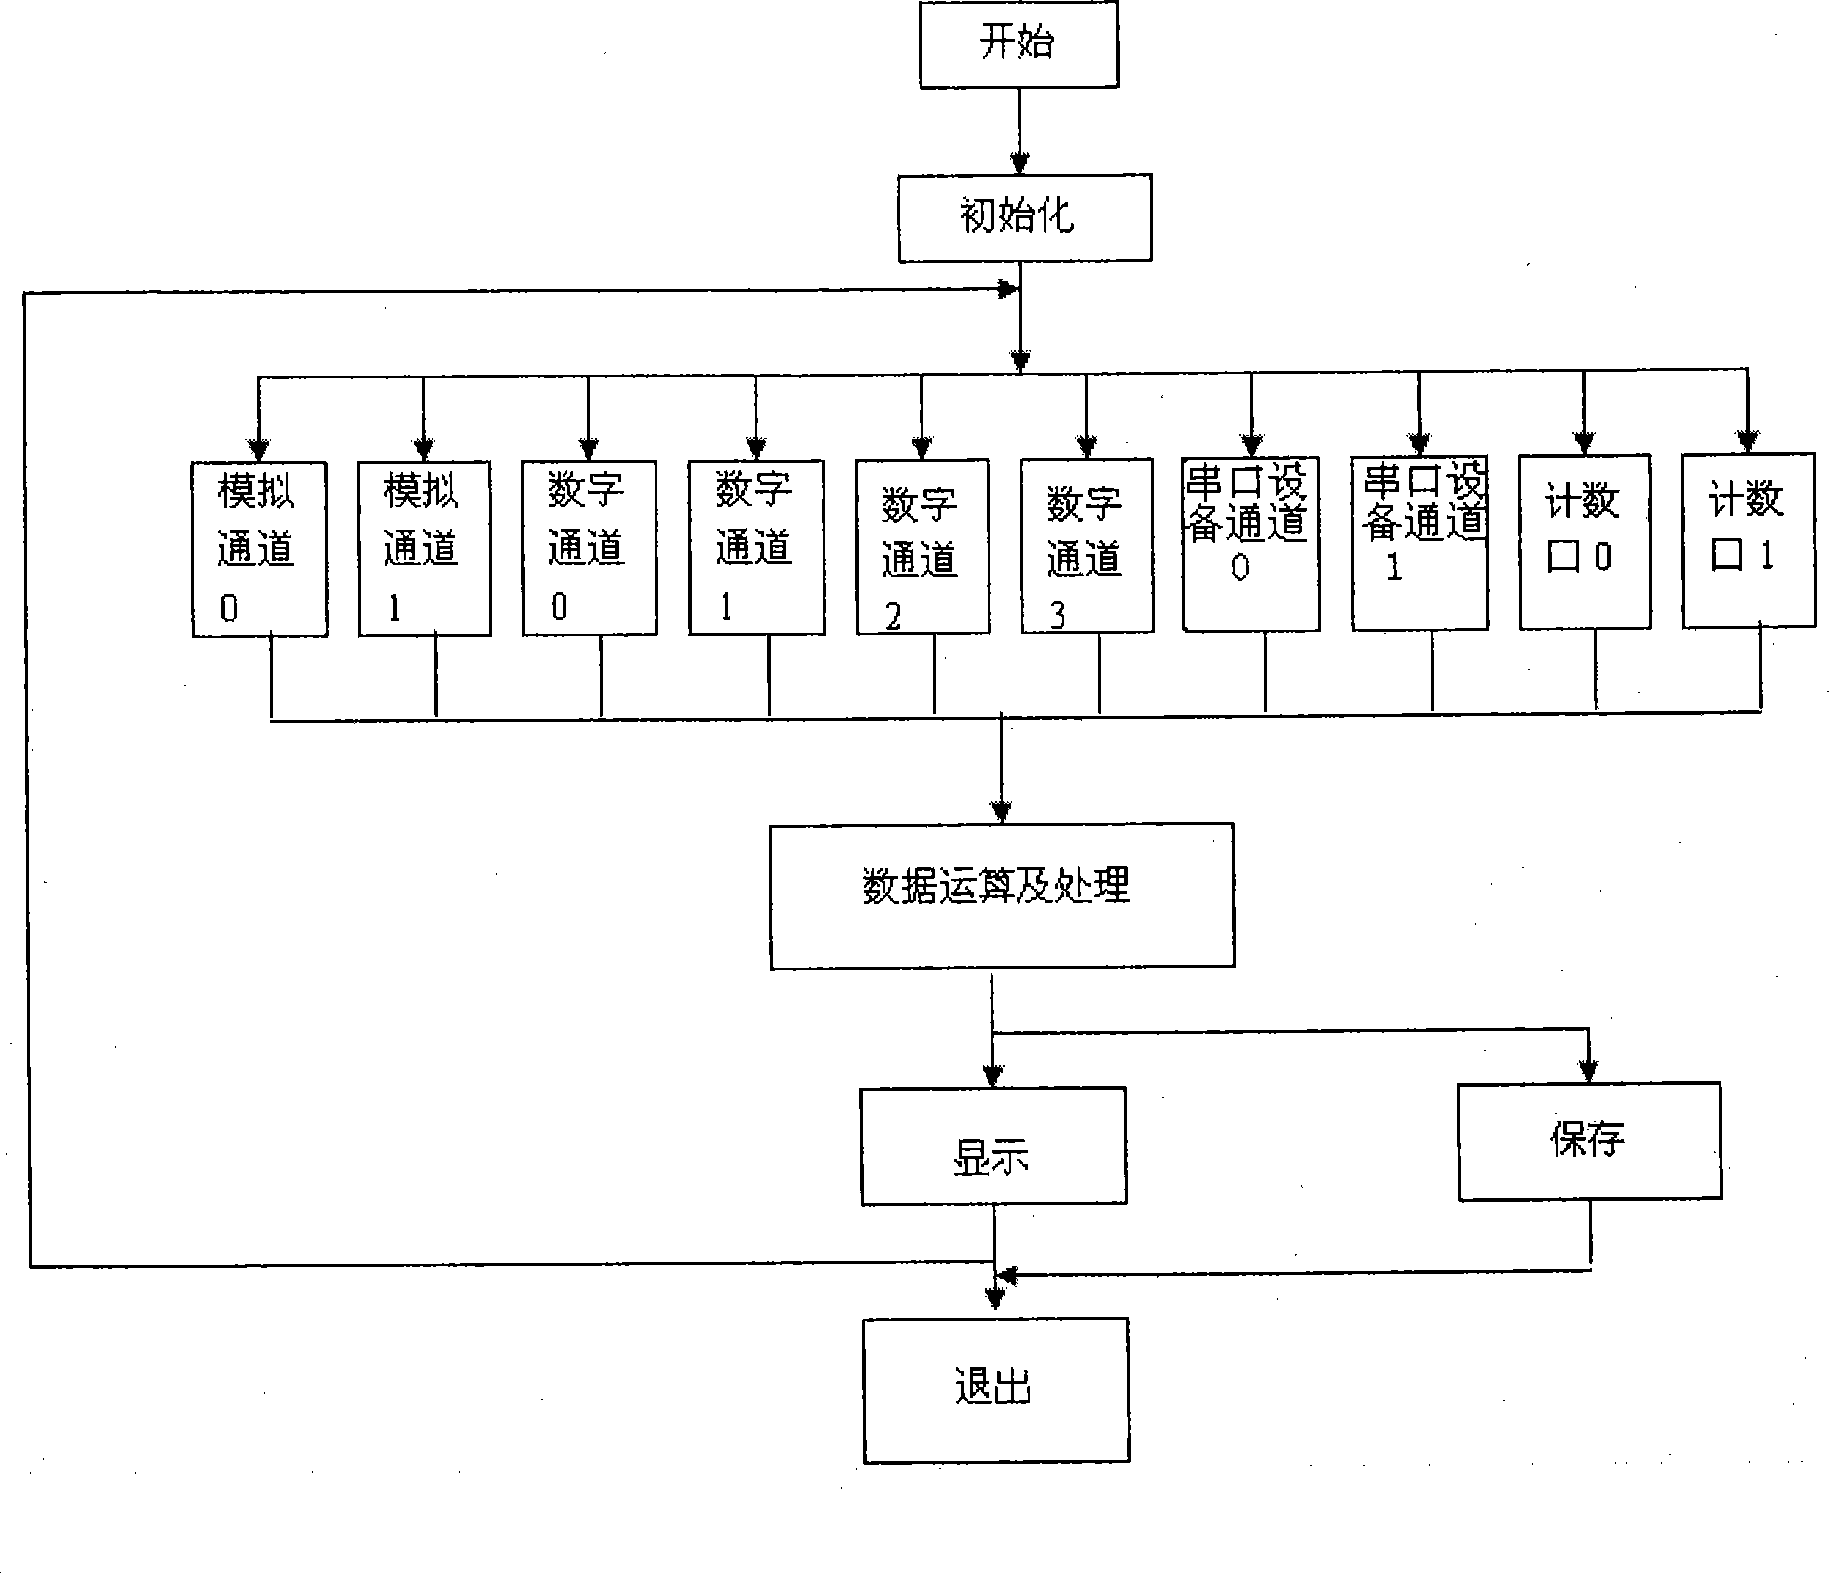 Data acquisition method for real time monitoring system